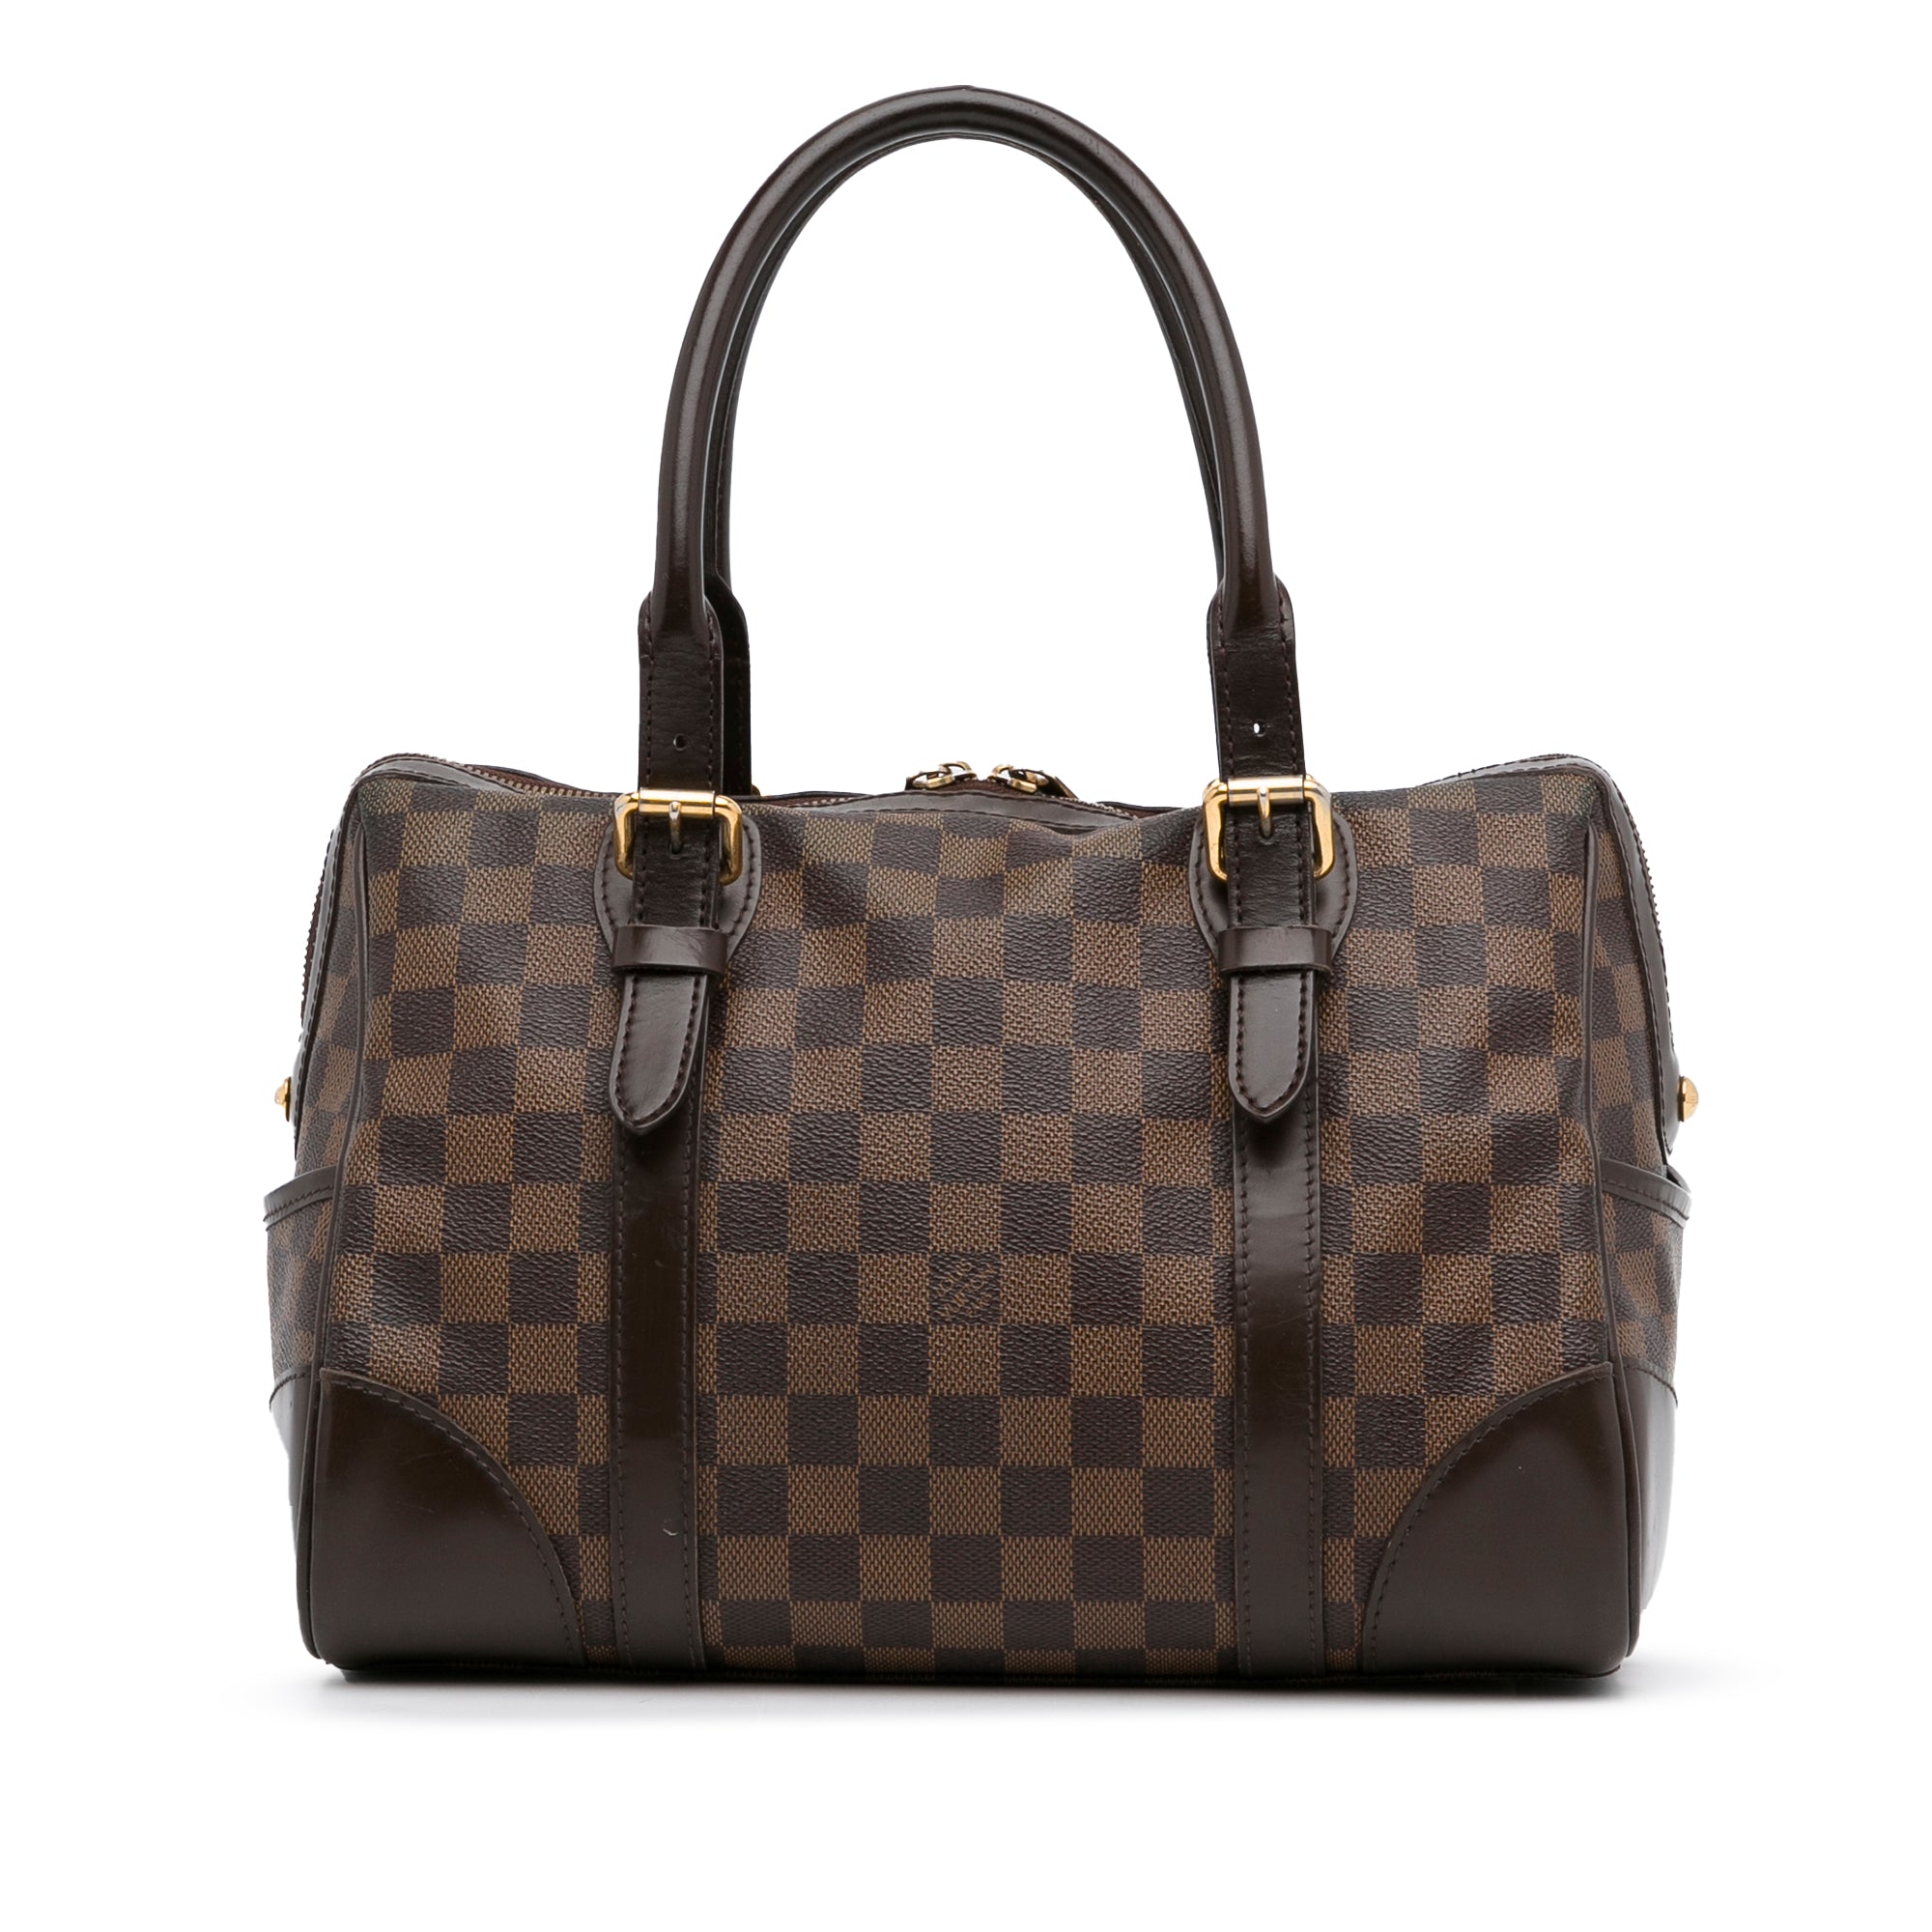 The Louis Vuitton Berkeley is like a Speedy 30 with additional details